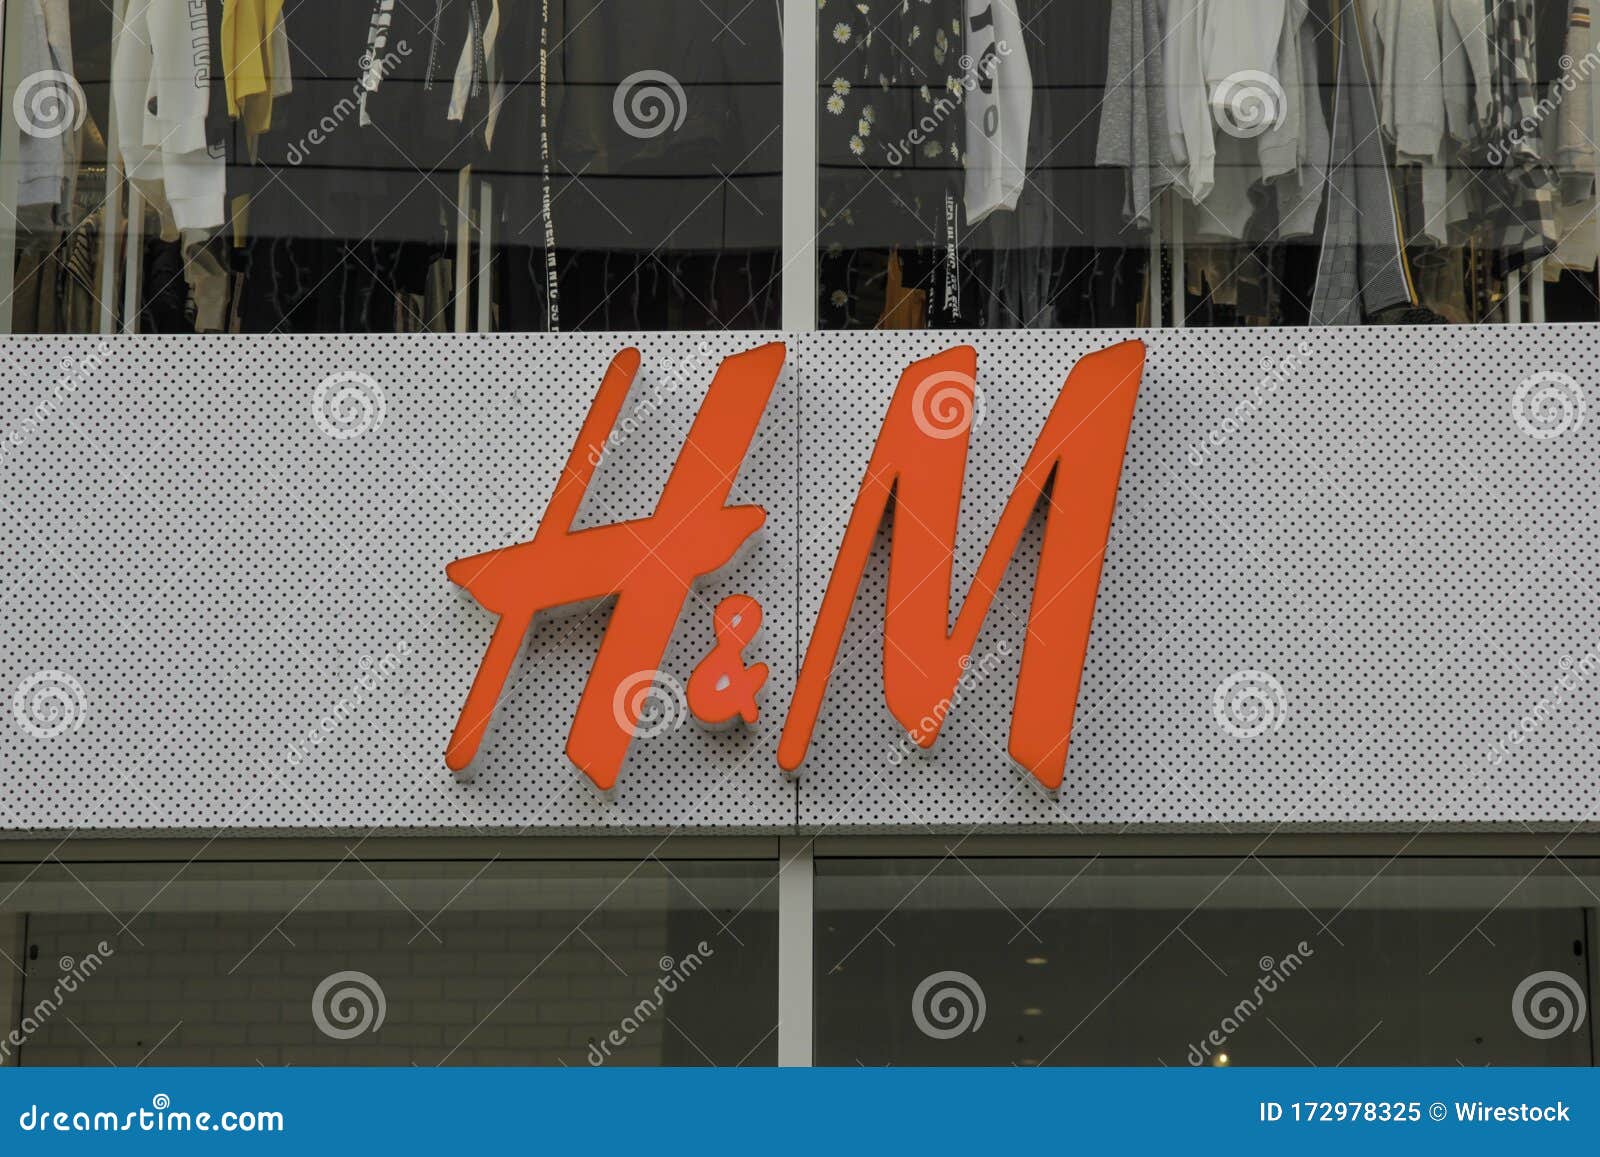 Close Up Shot of H&M Logo. Editorial Image - Image of boutique ...